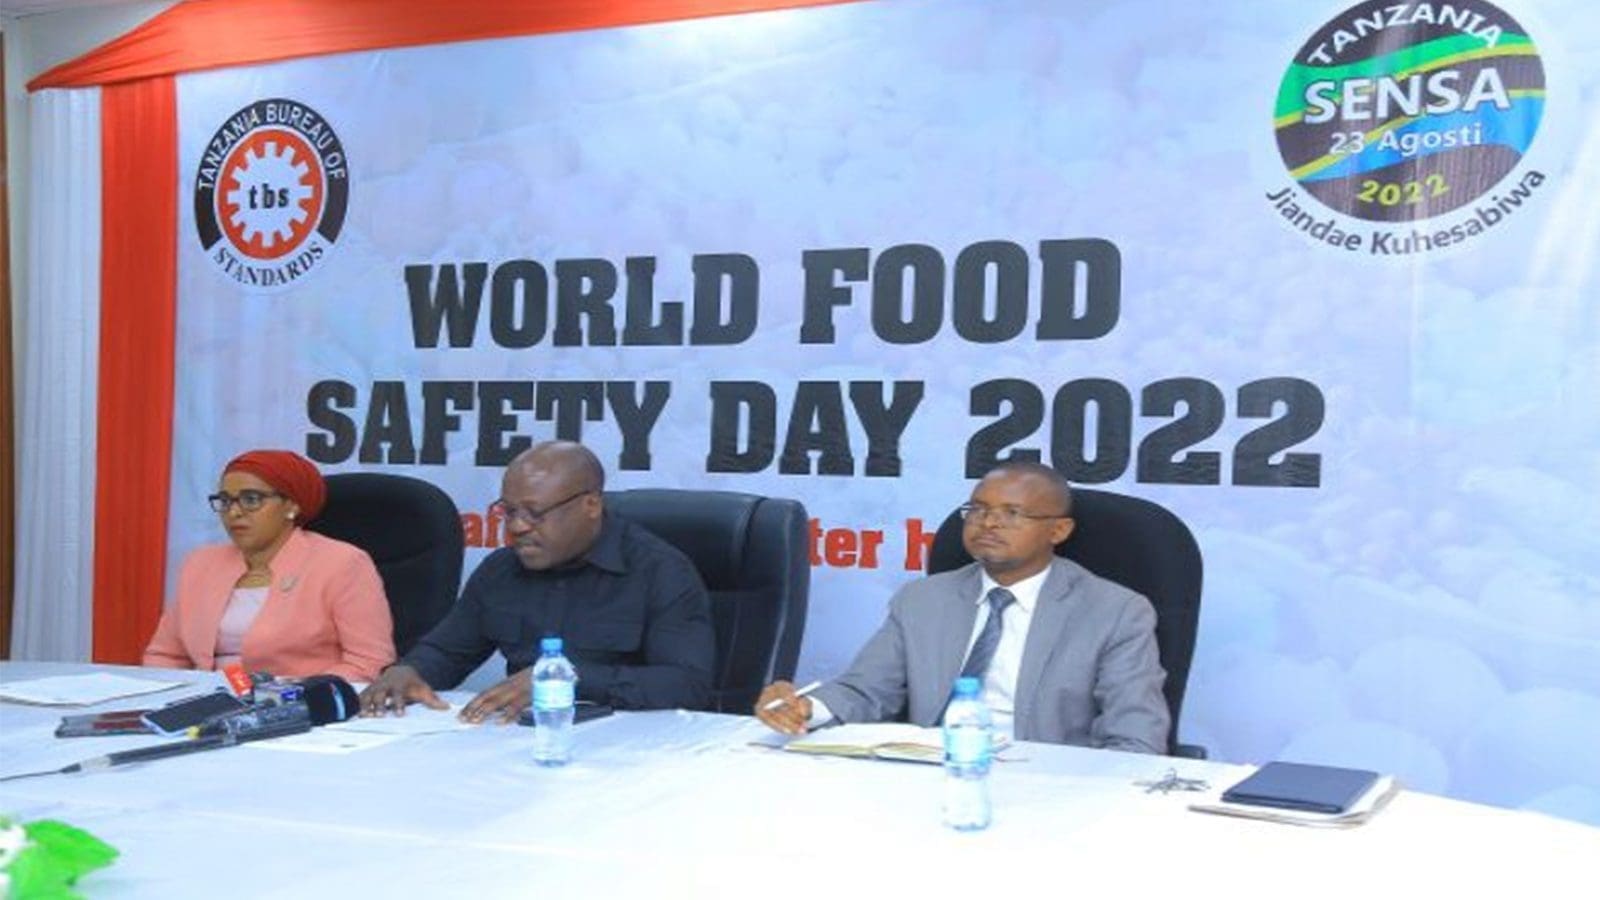 Tanzania Bureau of Standards reminds consumers of their role in ensuring food safety